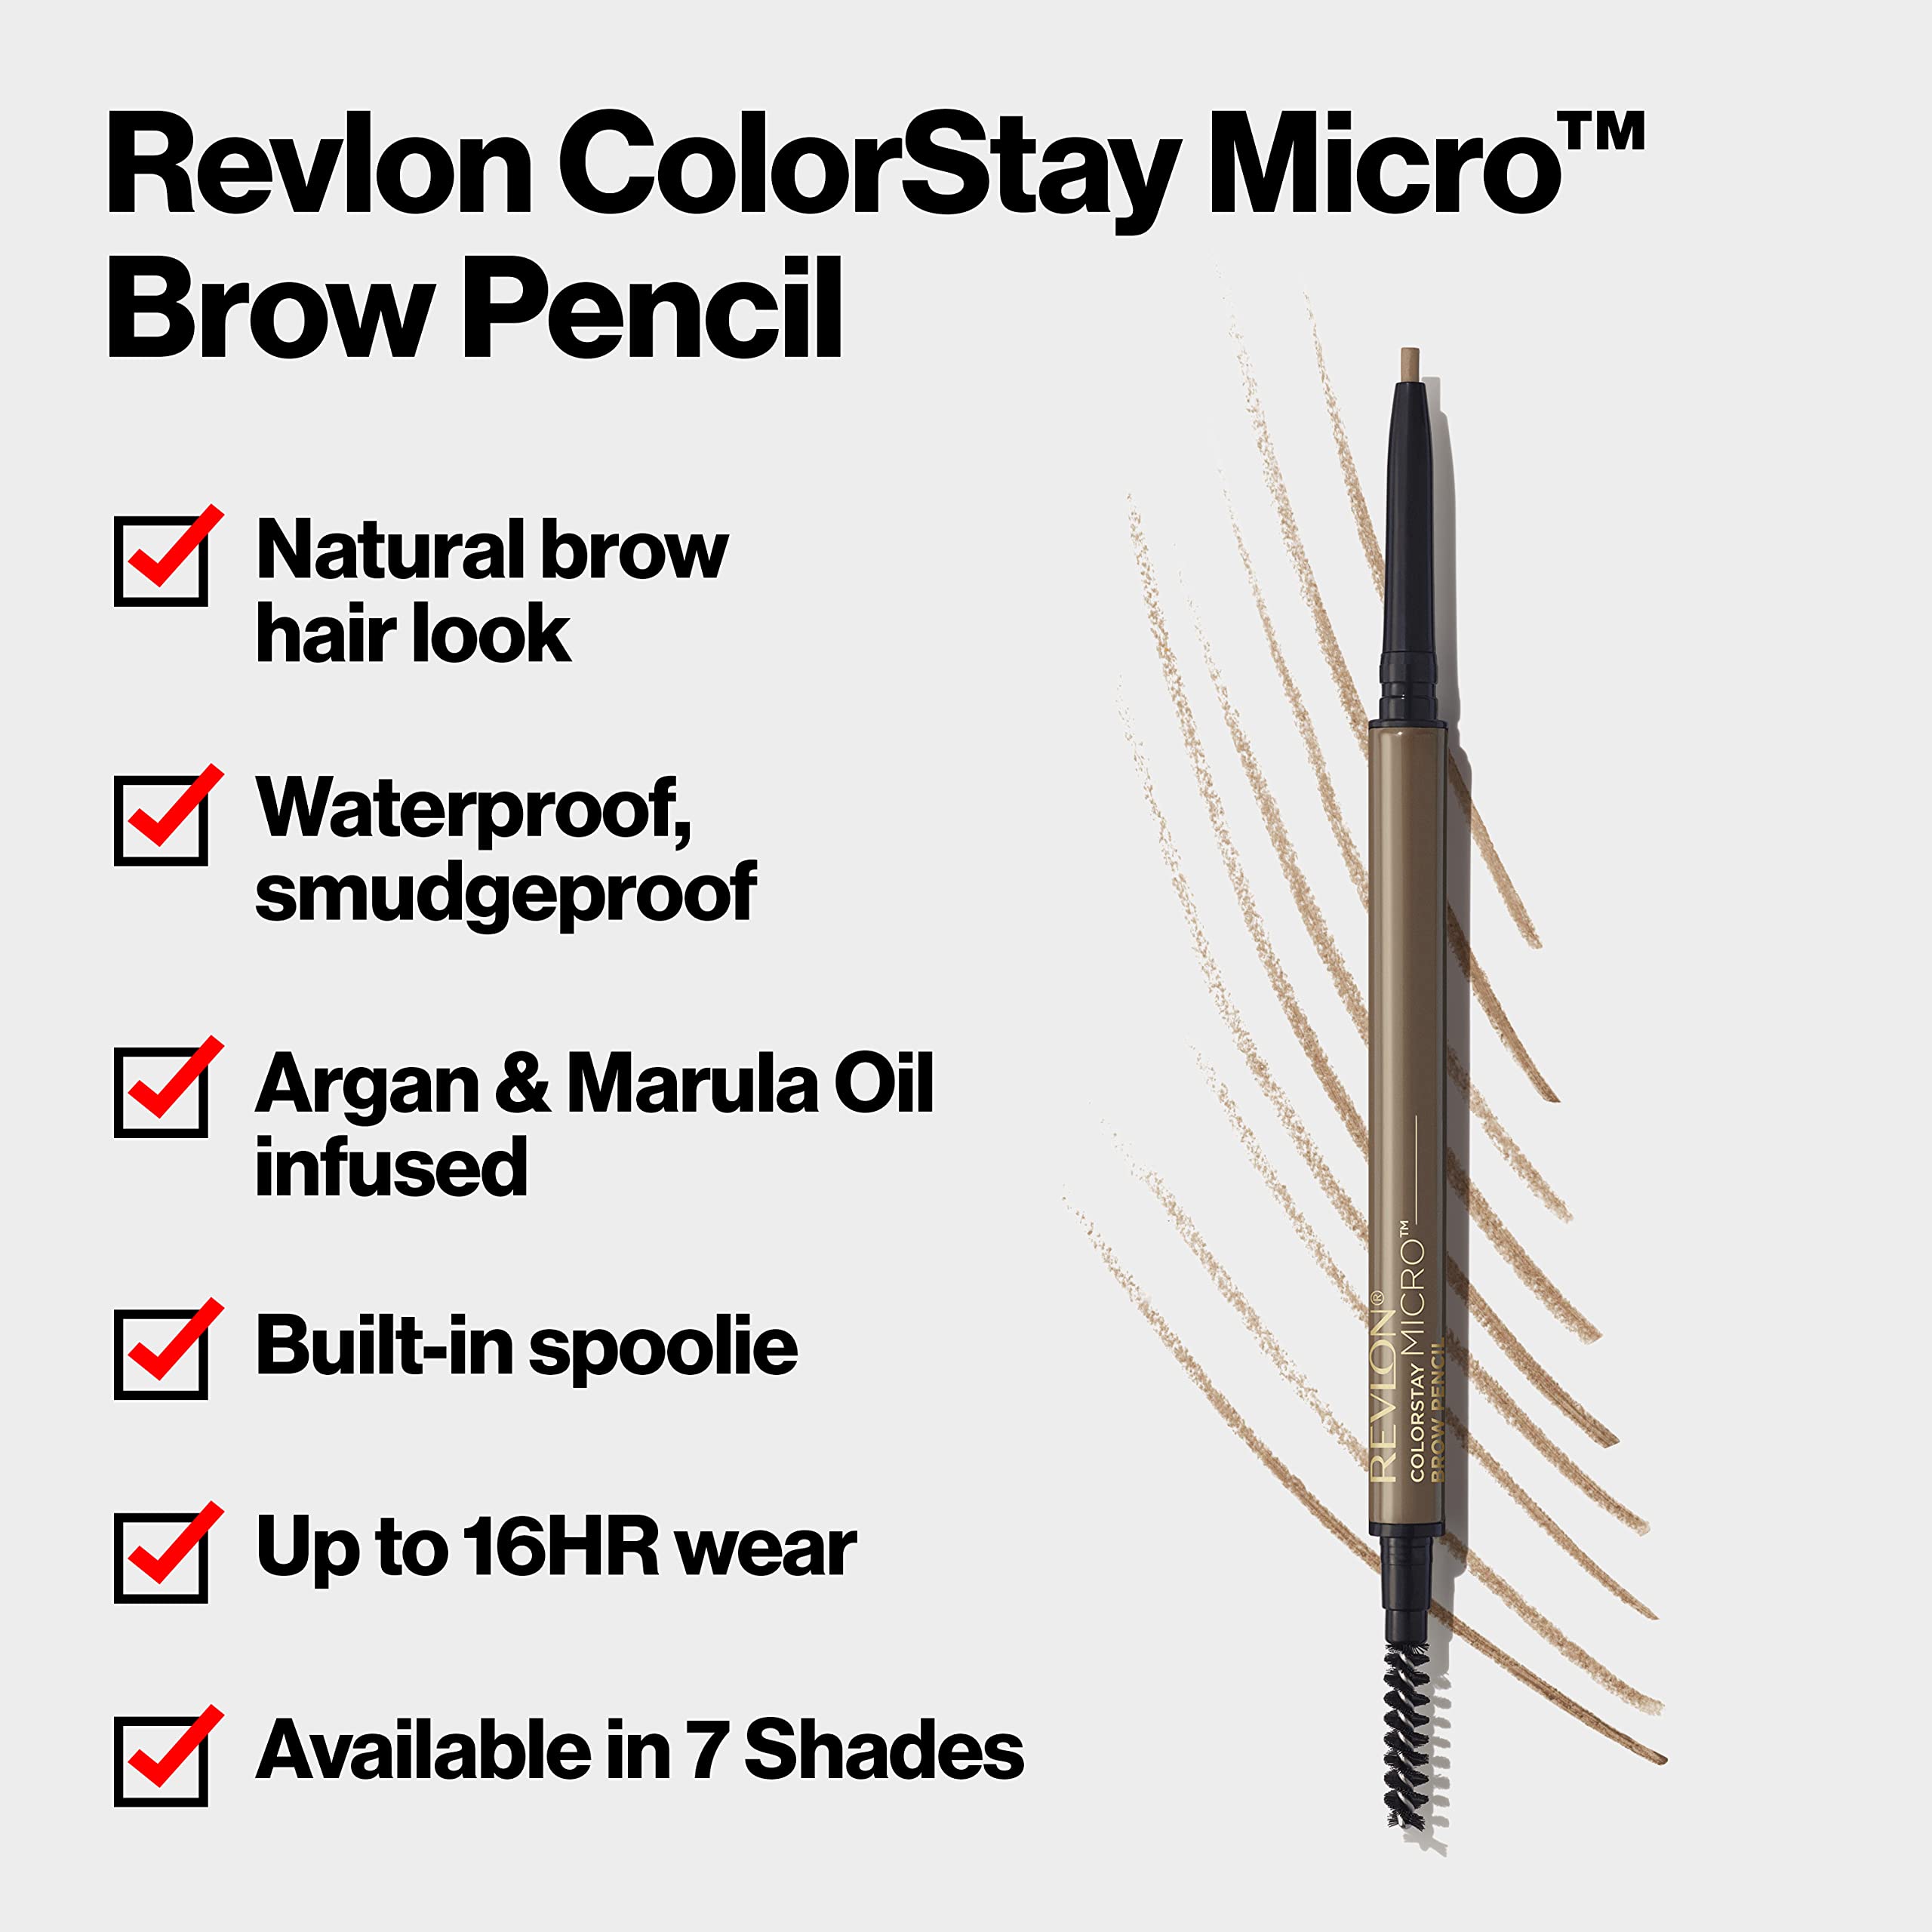 Revlon ColorStay Micro Eyebrow Pencil with Built In Spoolie Brush, Infused with Argan and Marula Oil, Waterproof, Smudgeproof, 456 Dark Brown (Pack of 1)